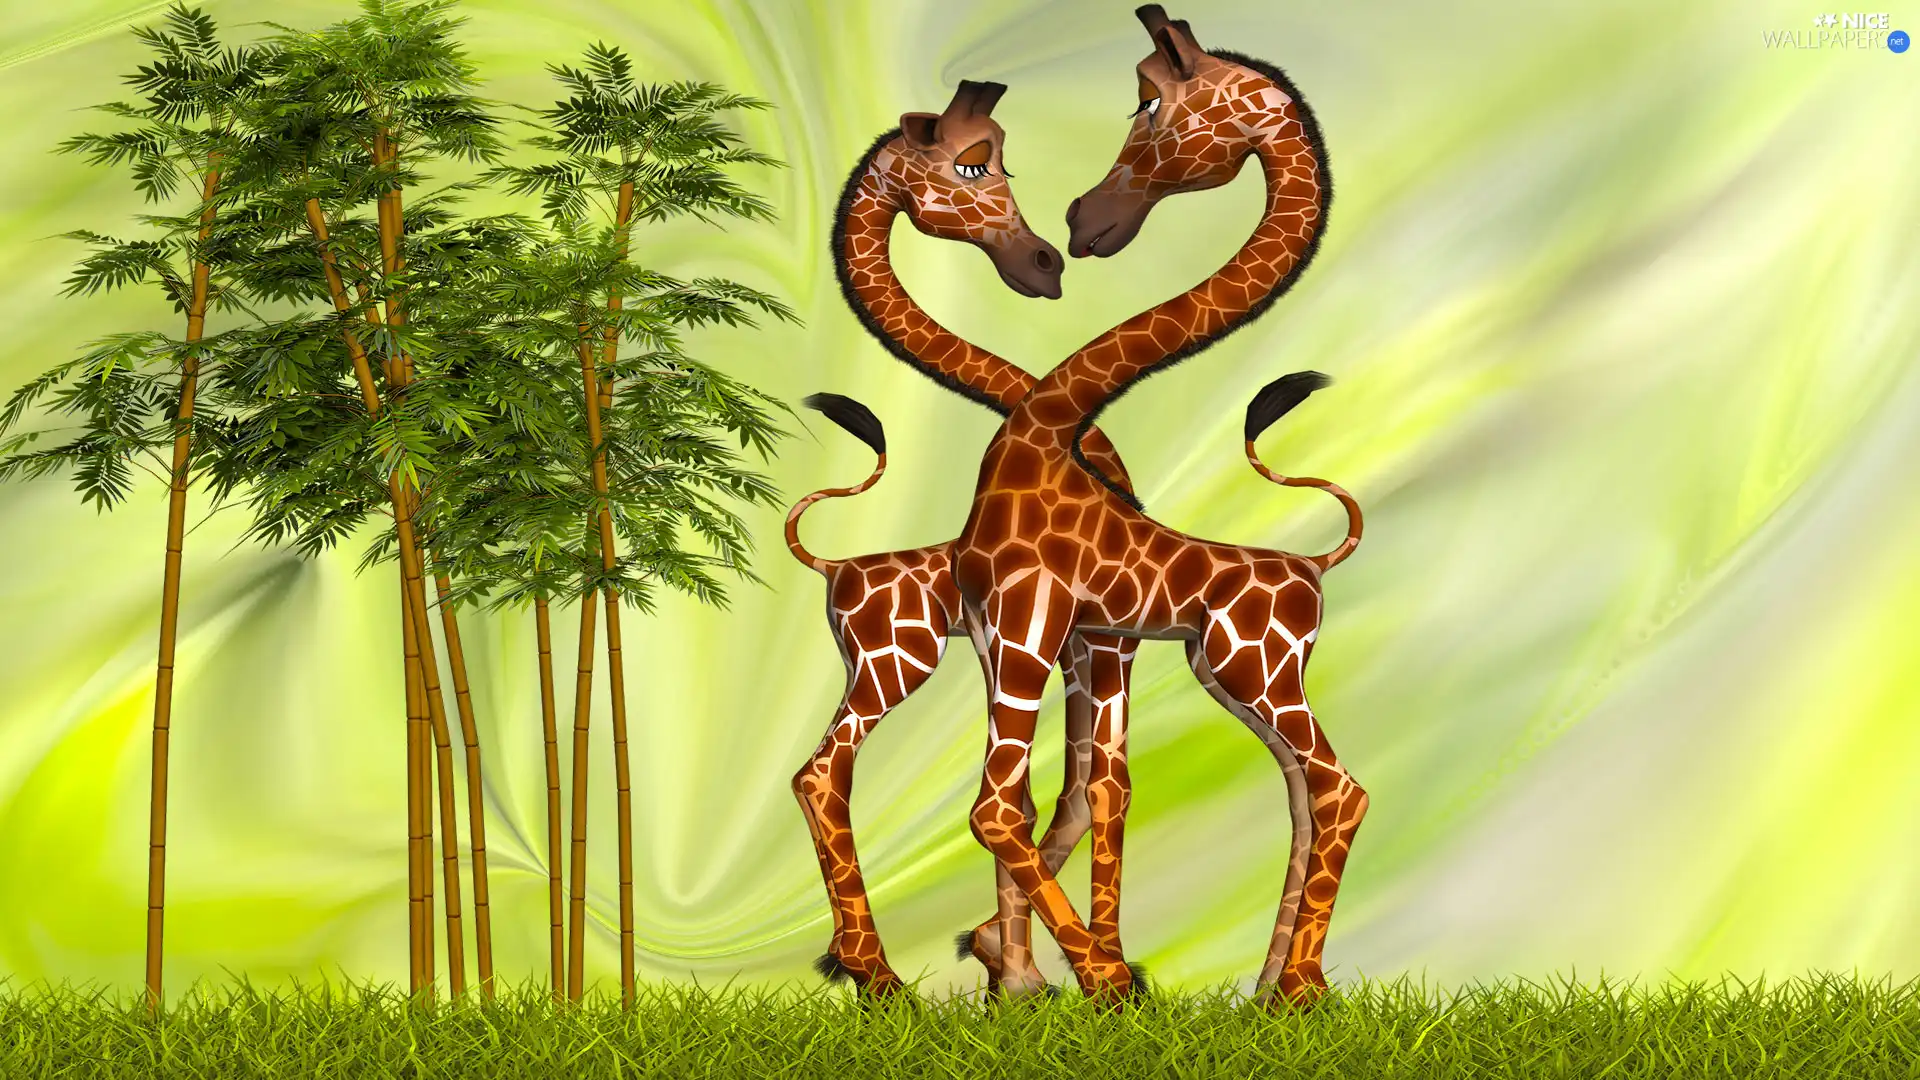 viewes, For Children, giraffe, trees, graphics